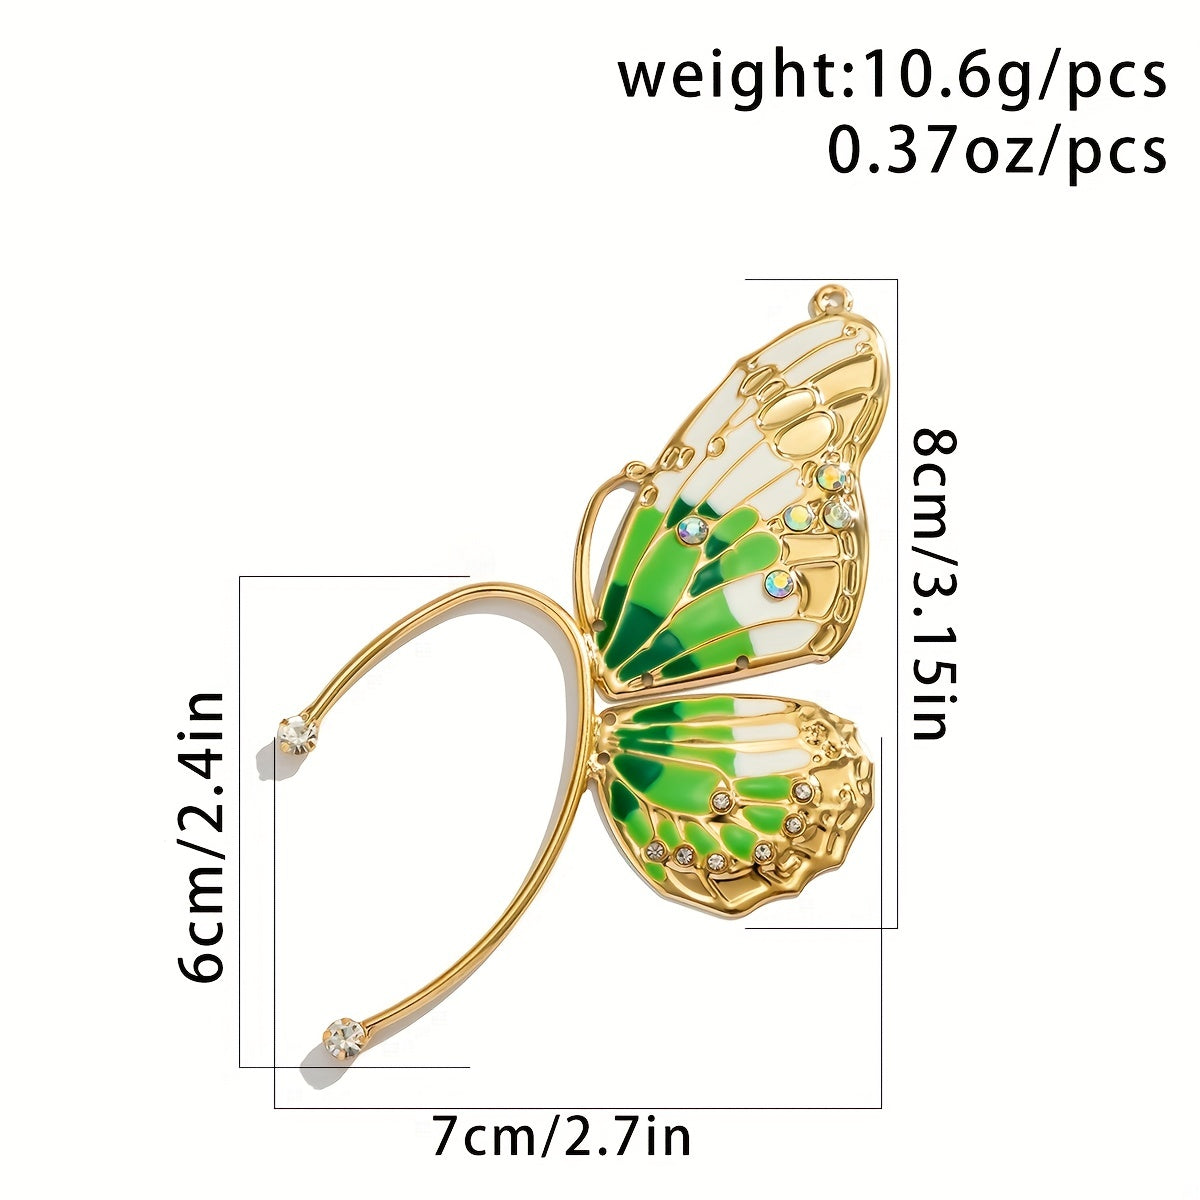 Gorgeous Big Butterfly Wing Ear Wrap with Sparkling Rhinestones - Retro Cute Style Zinc Alloy Jewelry for the Stage